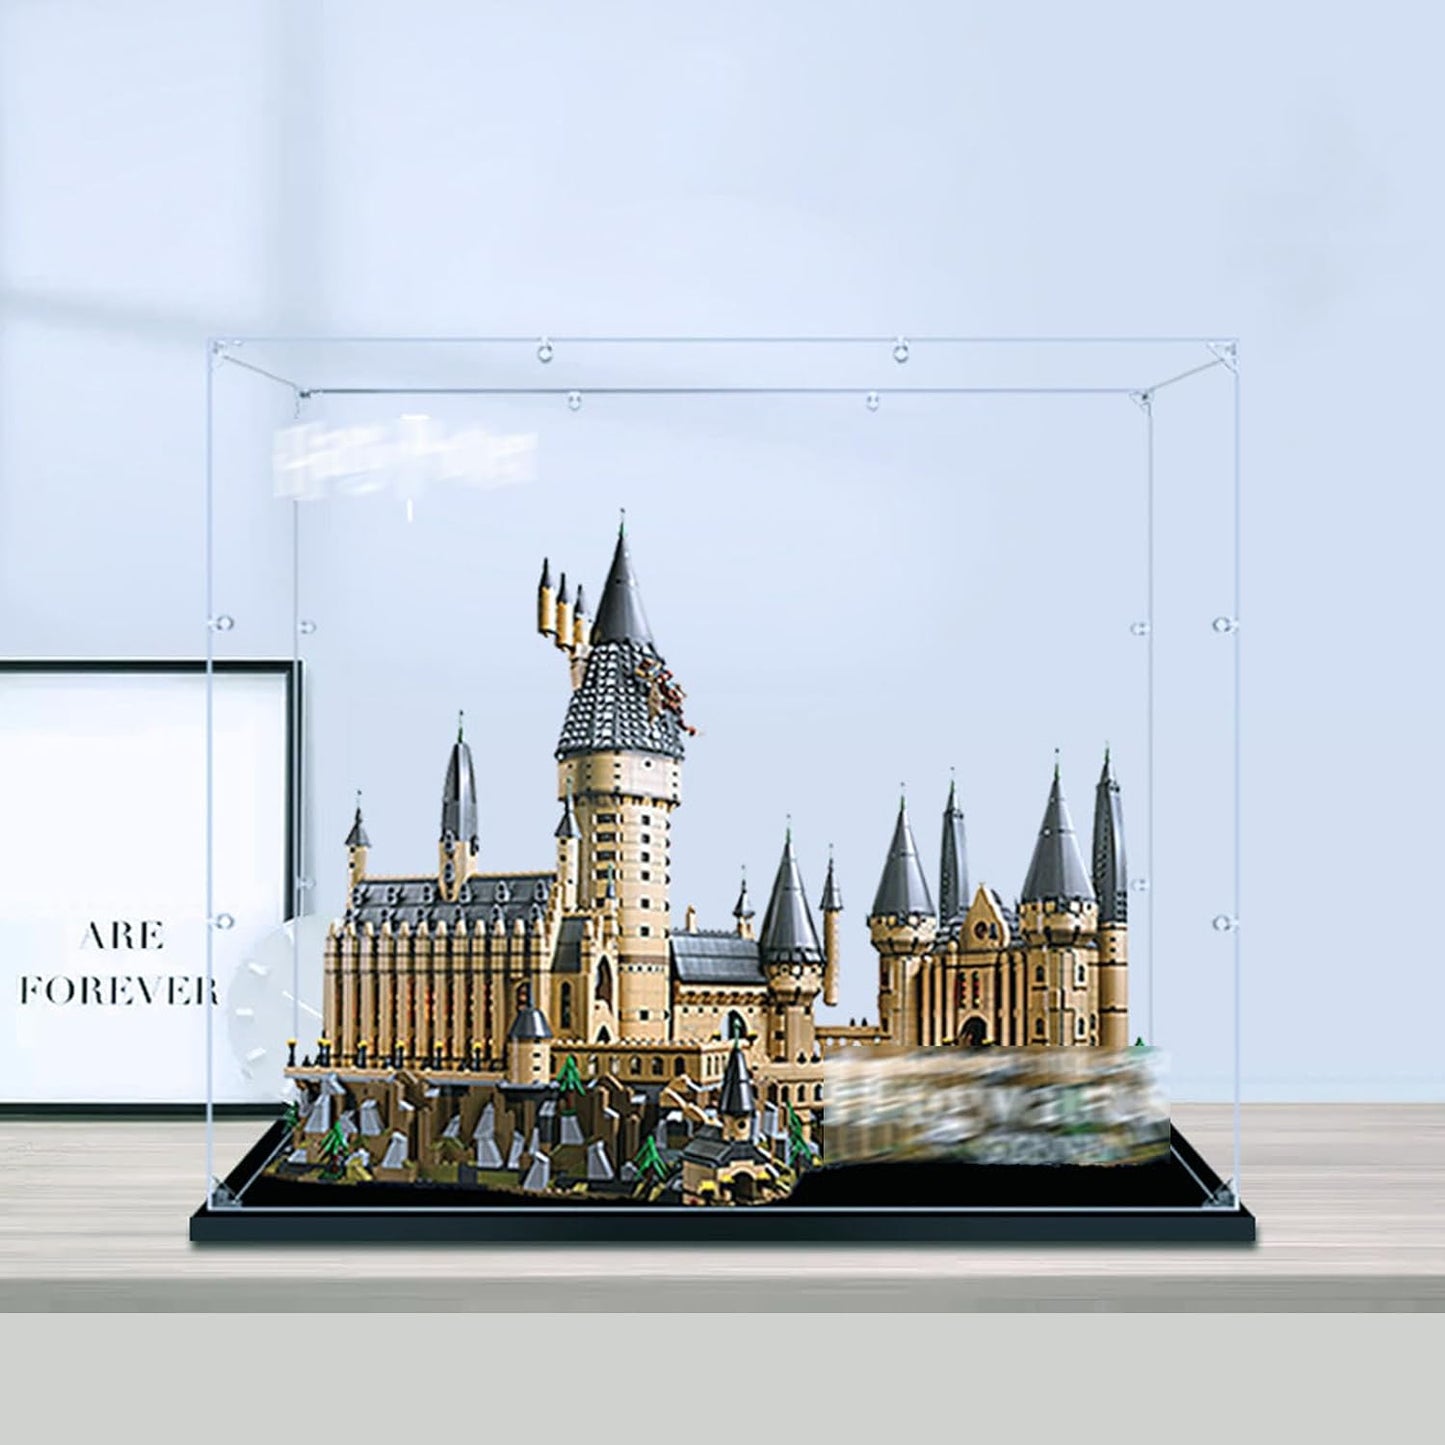 Acrylic Display Case Clear Show Box.Display Box for Lego Harry Potter Hogwarts Castle 71043 Building Model. (Only Storage Box,3mm) (Color base background version)